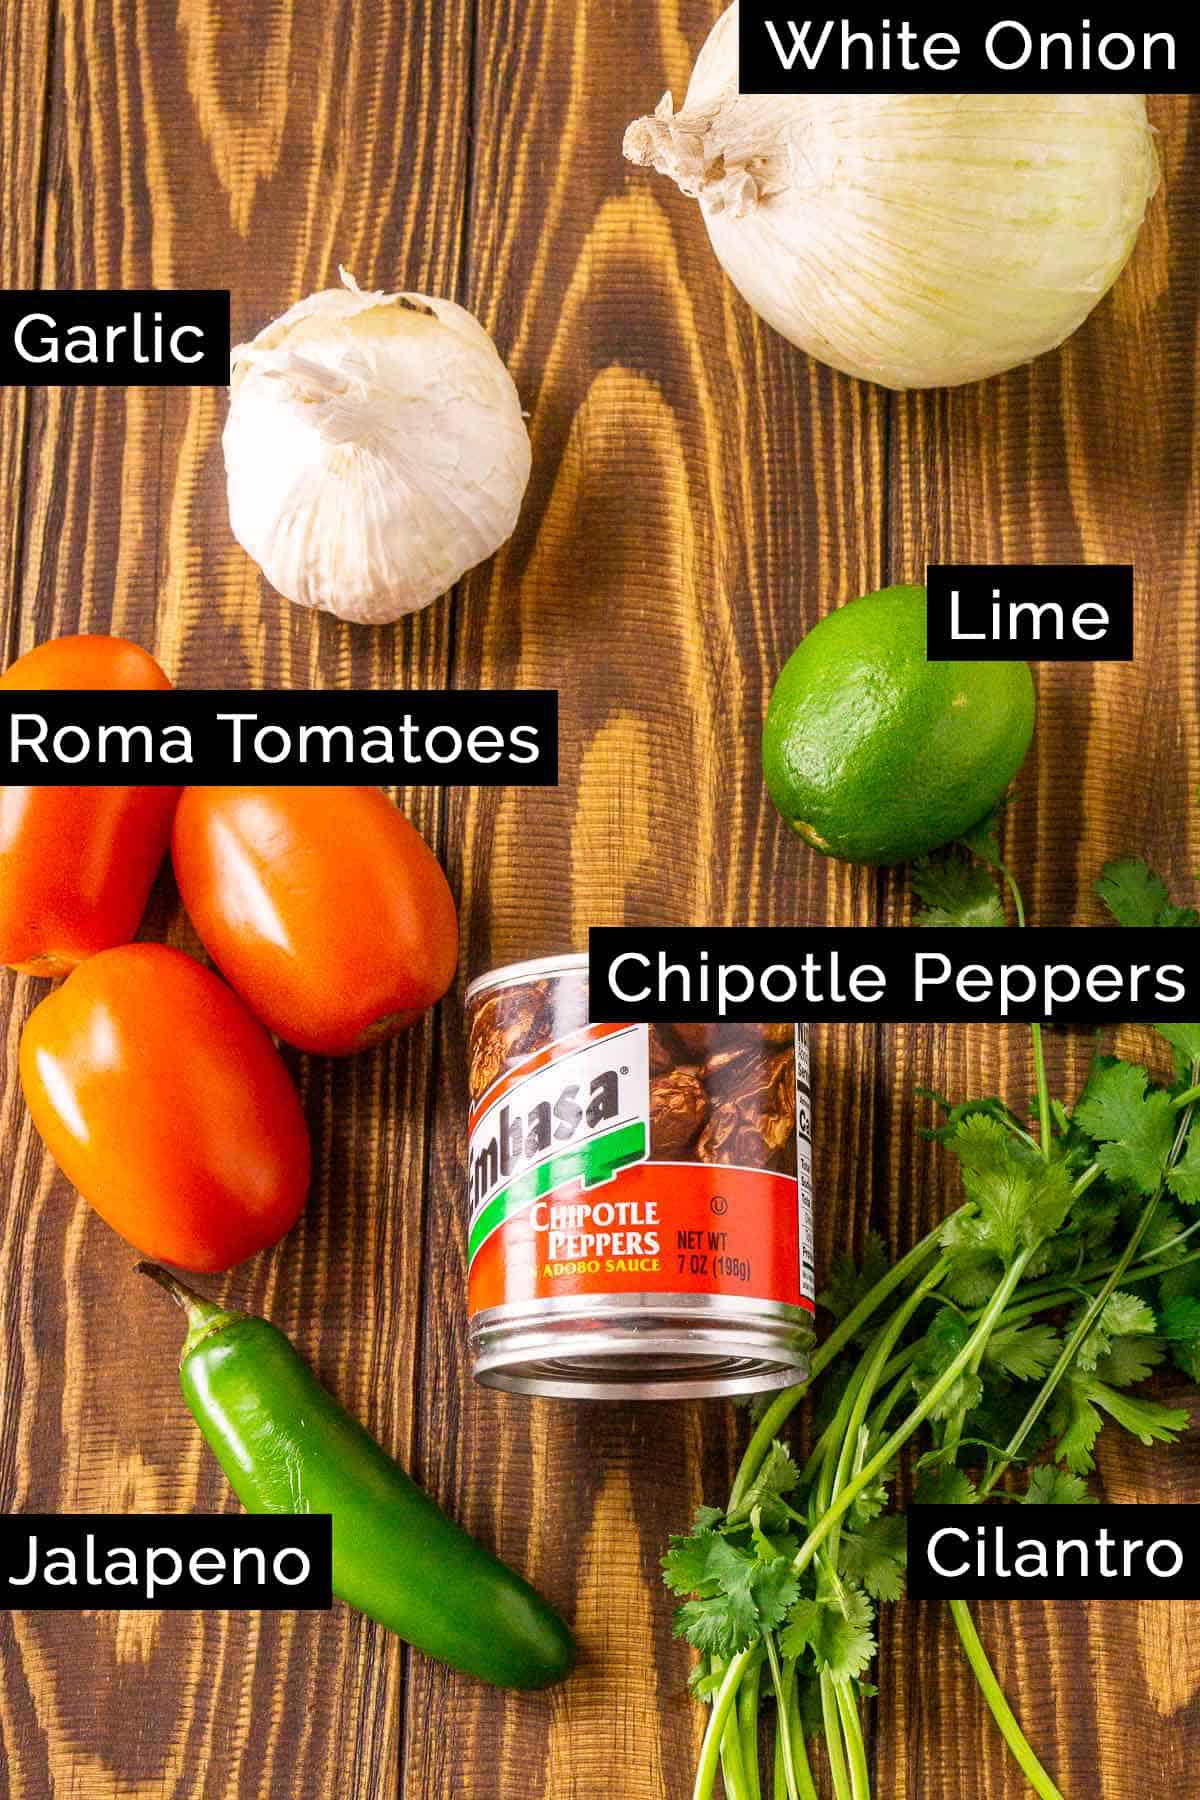 The ingredients on a wooden board with black and white labels.